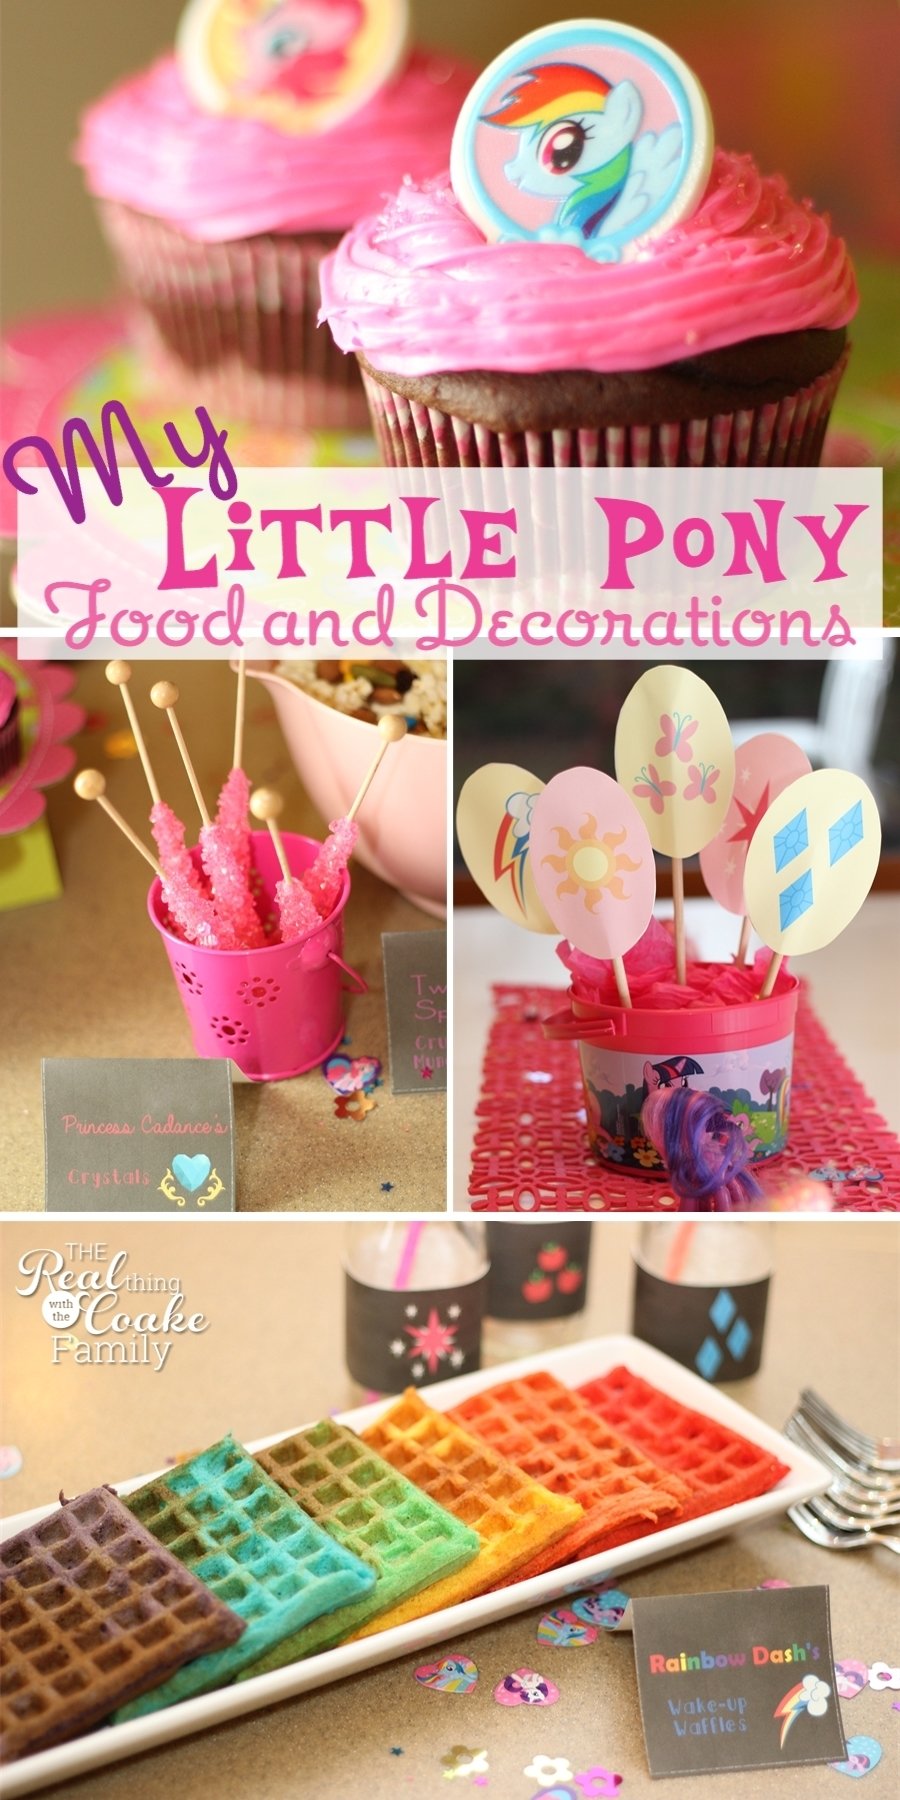 10 Great My Lil Pony Party Ideas my little pony birthday party food and decorating ideas 2022